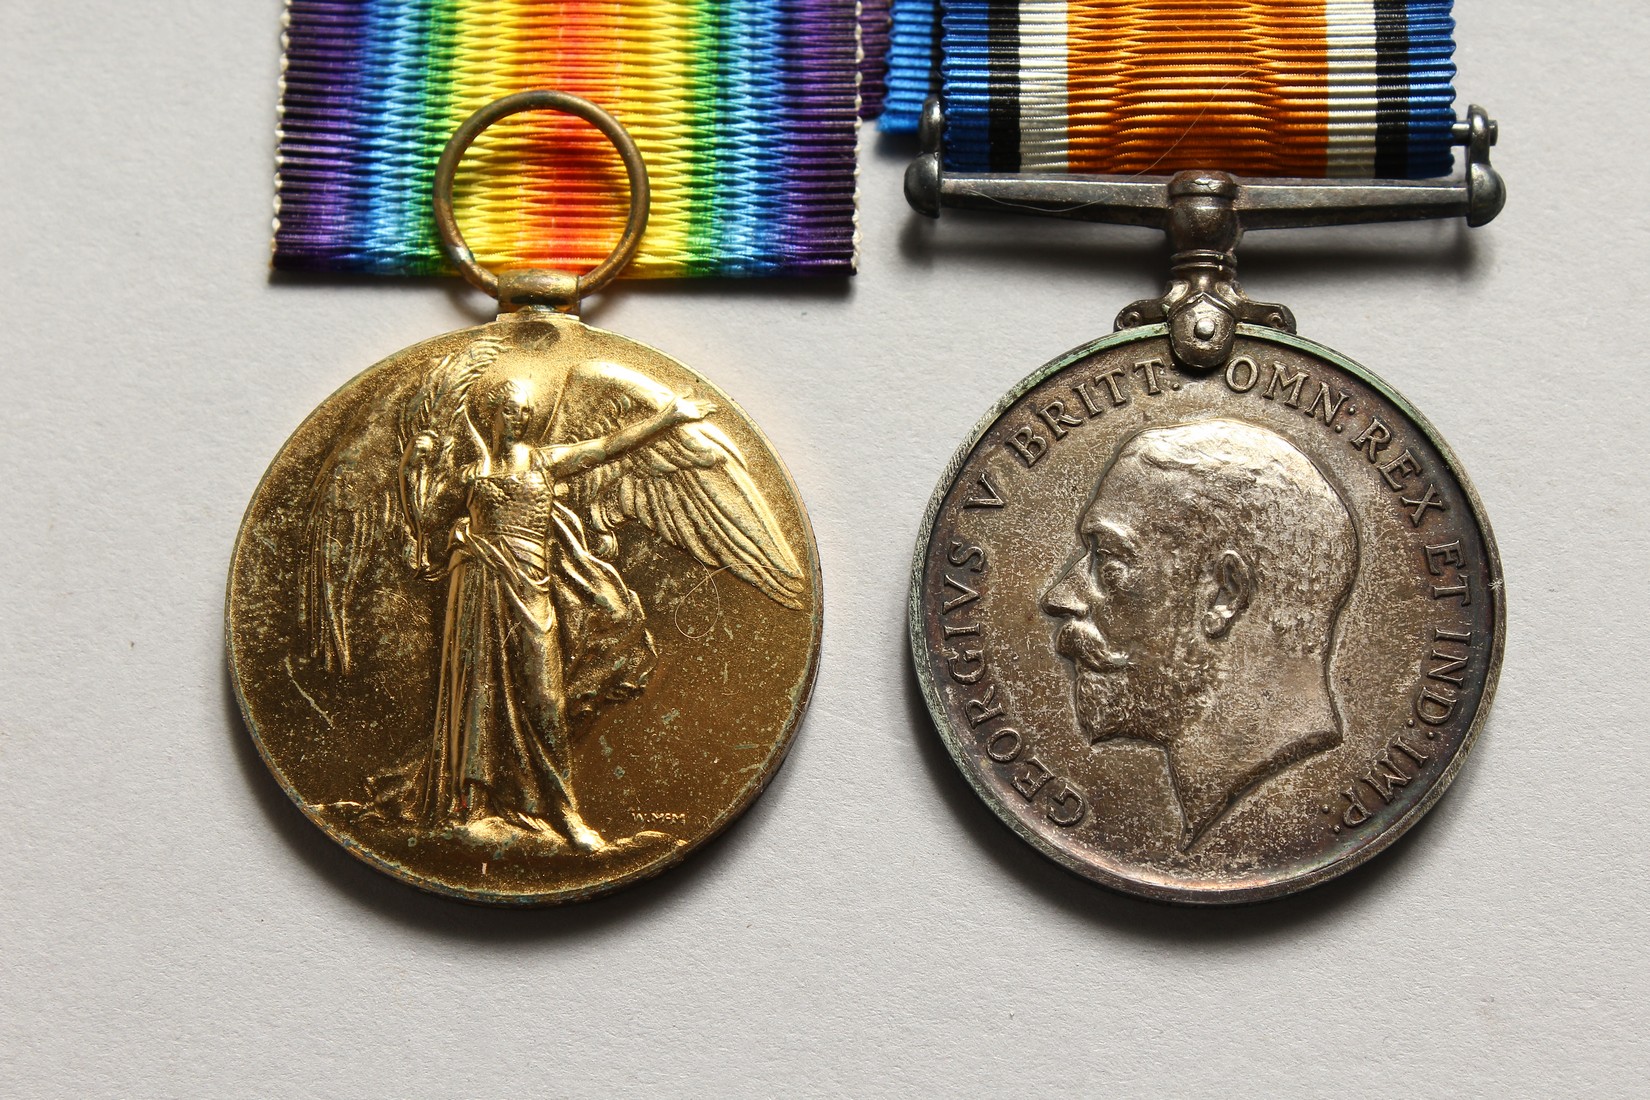 THE MEDALS OF PTE. L. J. PHILLIPS, 23rd LONDON REG. Later 13524. Army Pay Corps. - Image 2 of 7